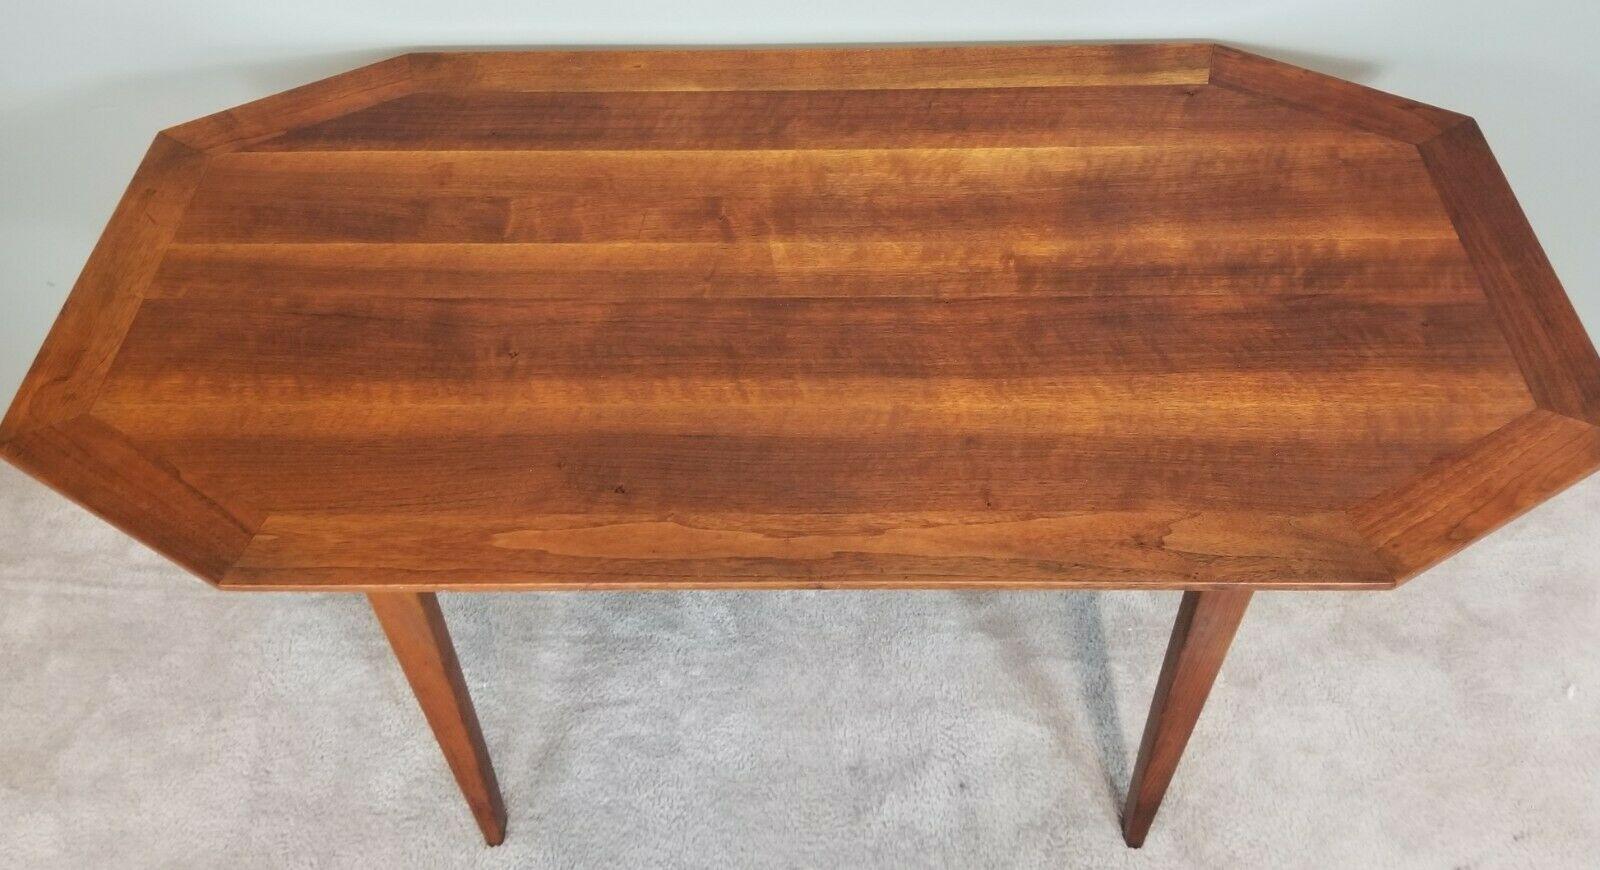 Offering One Of Our Recent Palm Beach Estate Fine Furniture Acquisitions Of A 
Teak Console Table by EDWARD WORMLEY for DUNBAR

Approximate Measurements in Inches
54